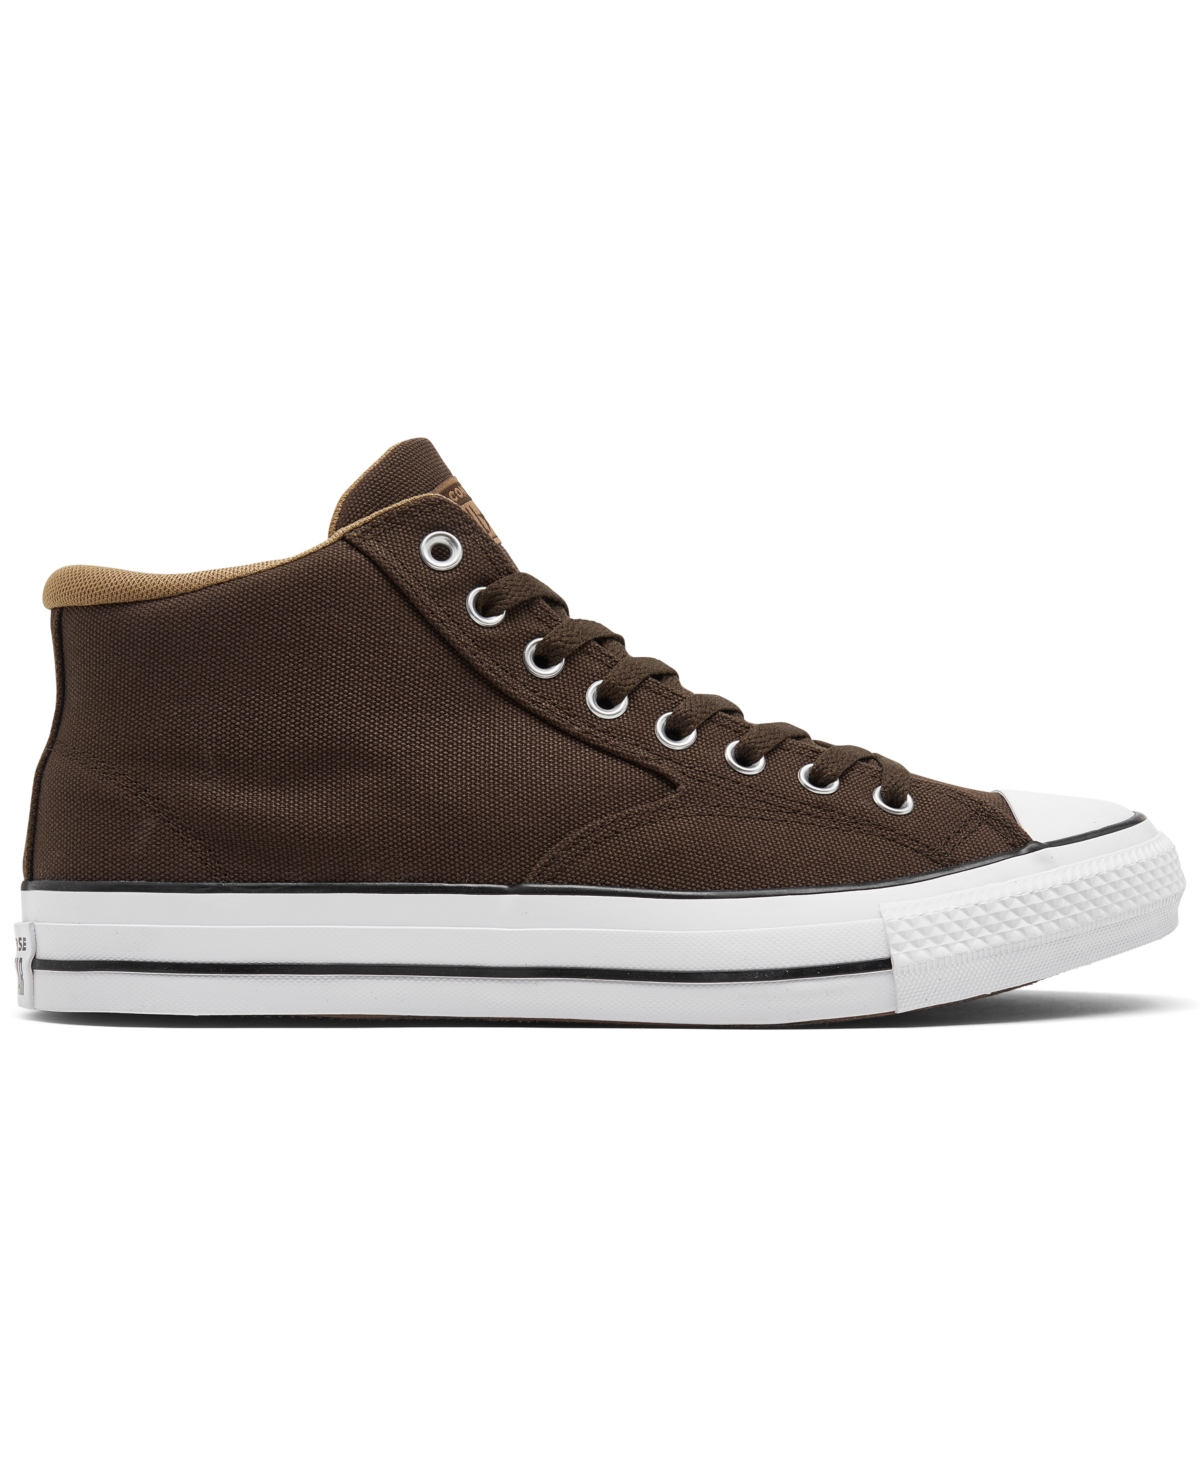 Shop Converse Men's Chuck Taylor All Star Malden Street Casual Sneakers From Finish Line In Fresh Brew,white